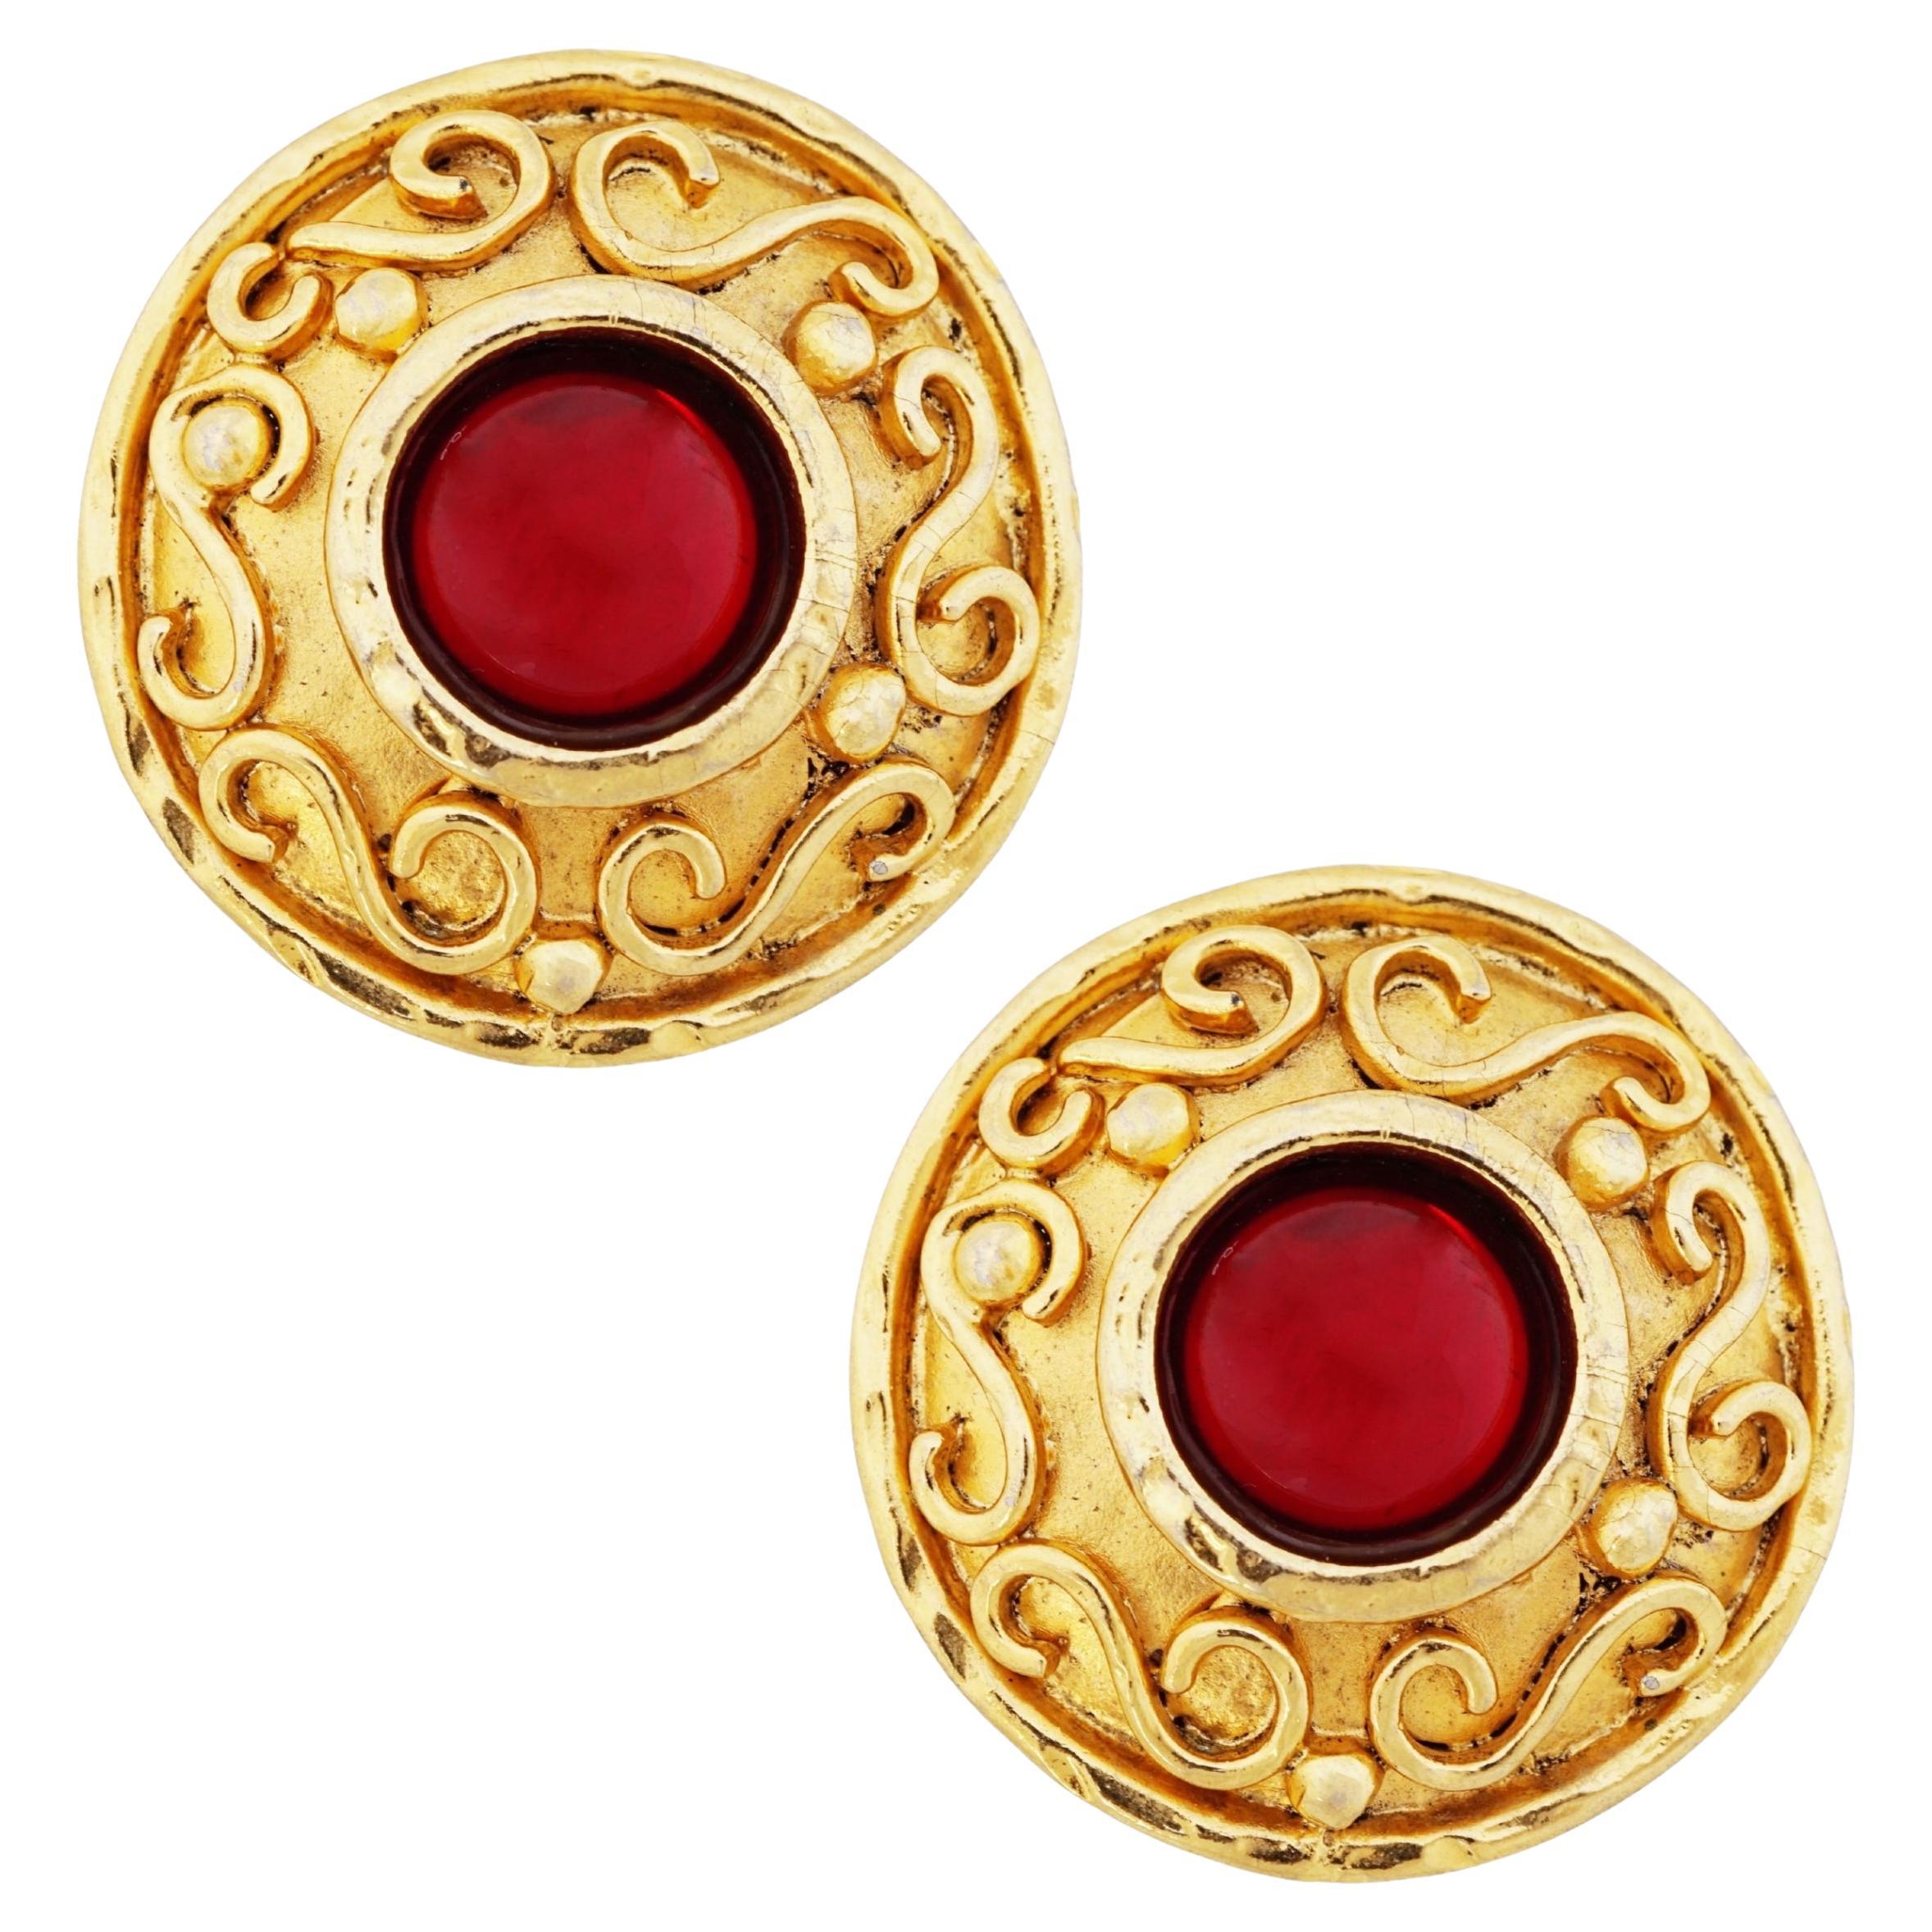 Red Glass Cabochon Coin Statement Earrings By Edouard Rambaud, 1990s For Sale